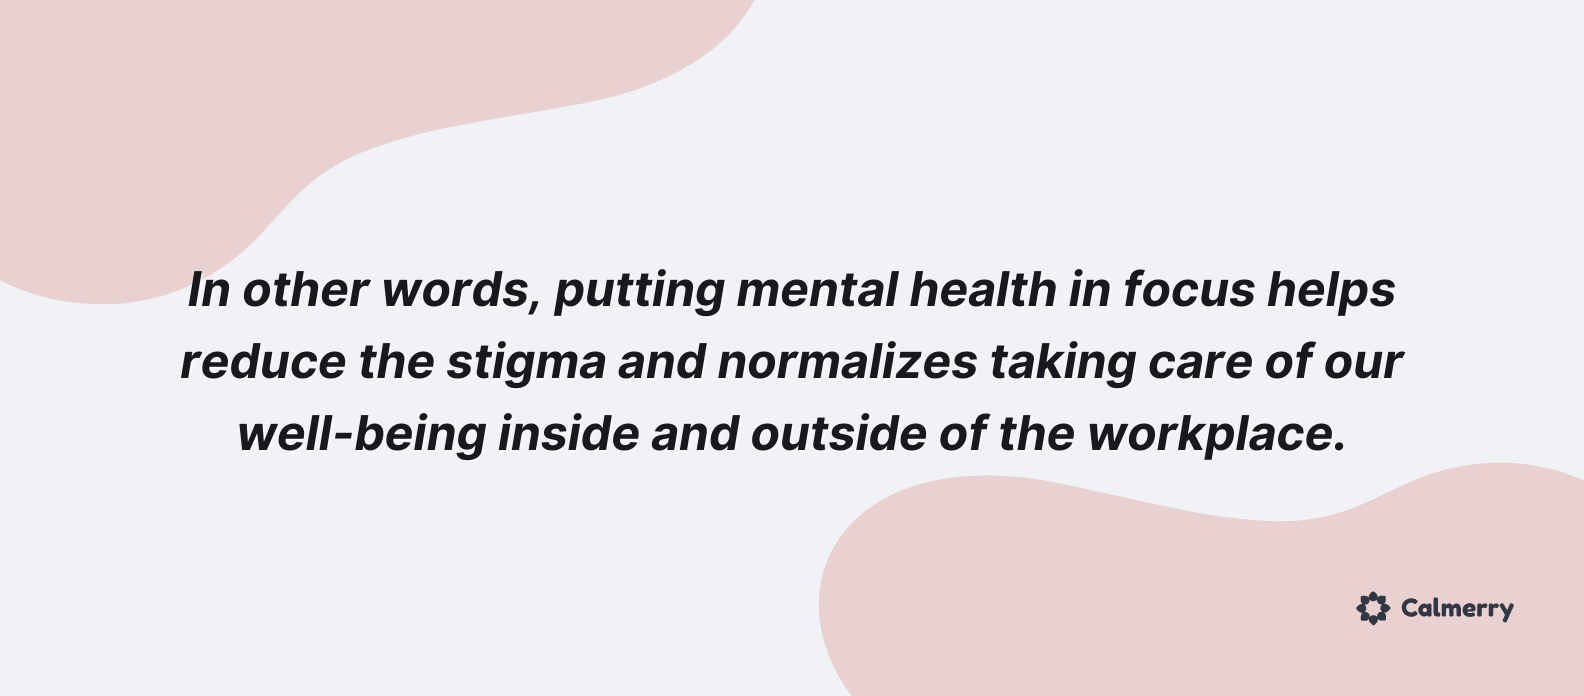 In other words, putting mental health in focus